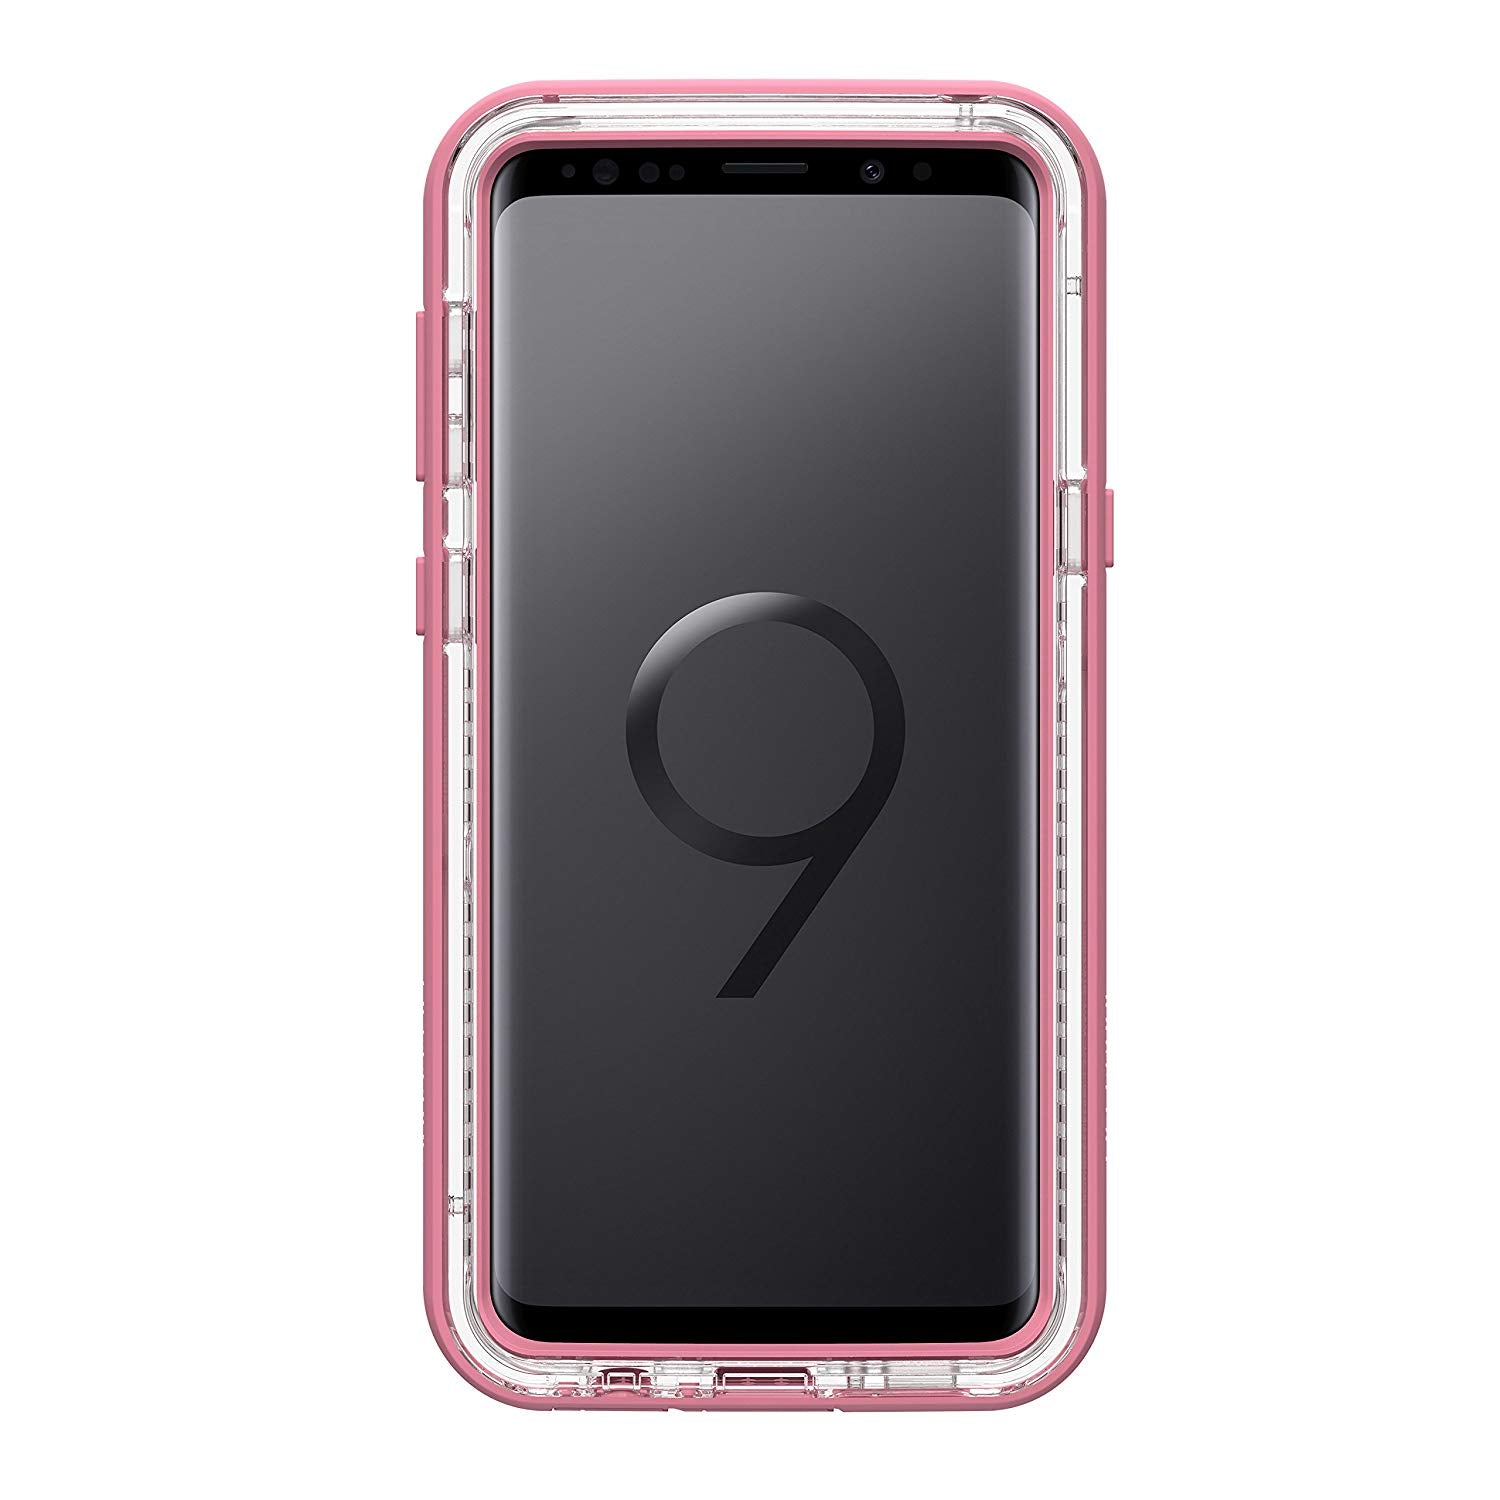 LifeProof NEXT SERIES Case for Galaxy S9 (ONLY) - Cactus Rose (Certified Refurbished)